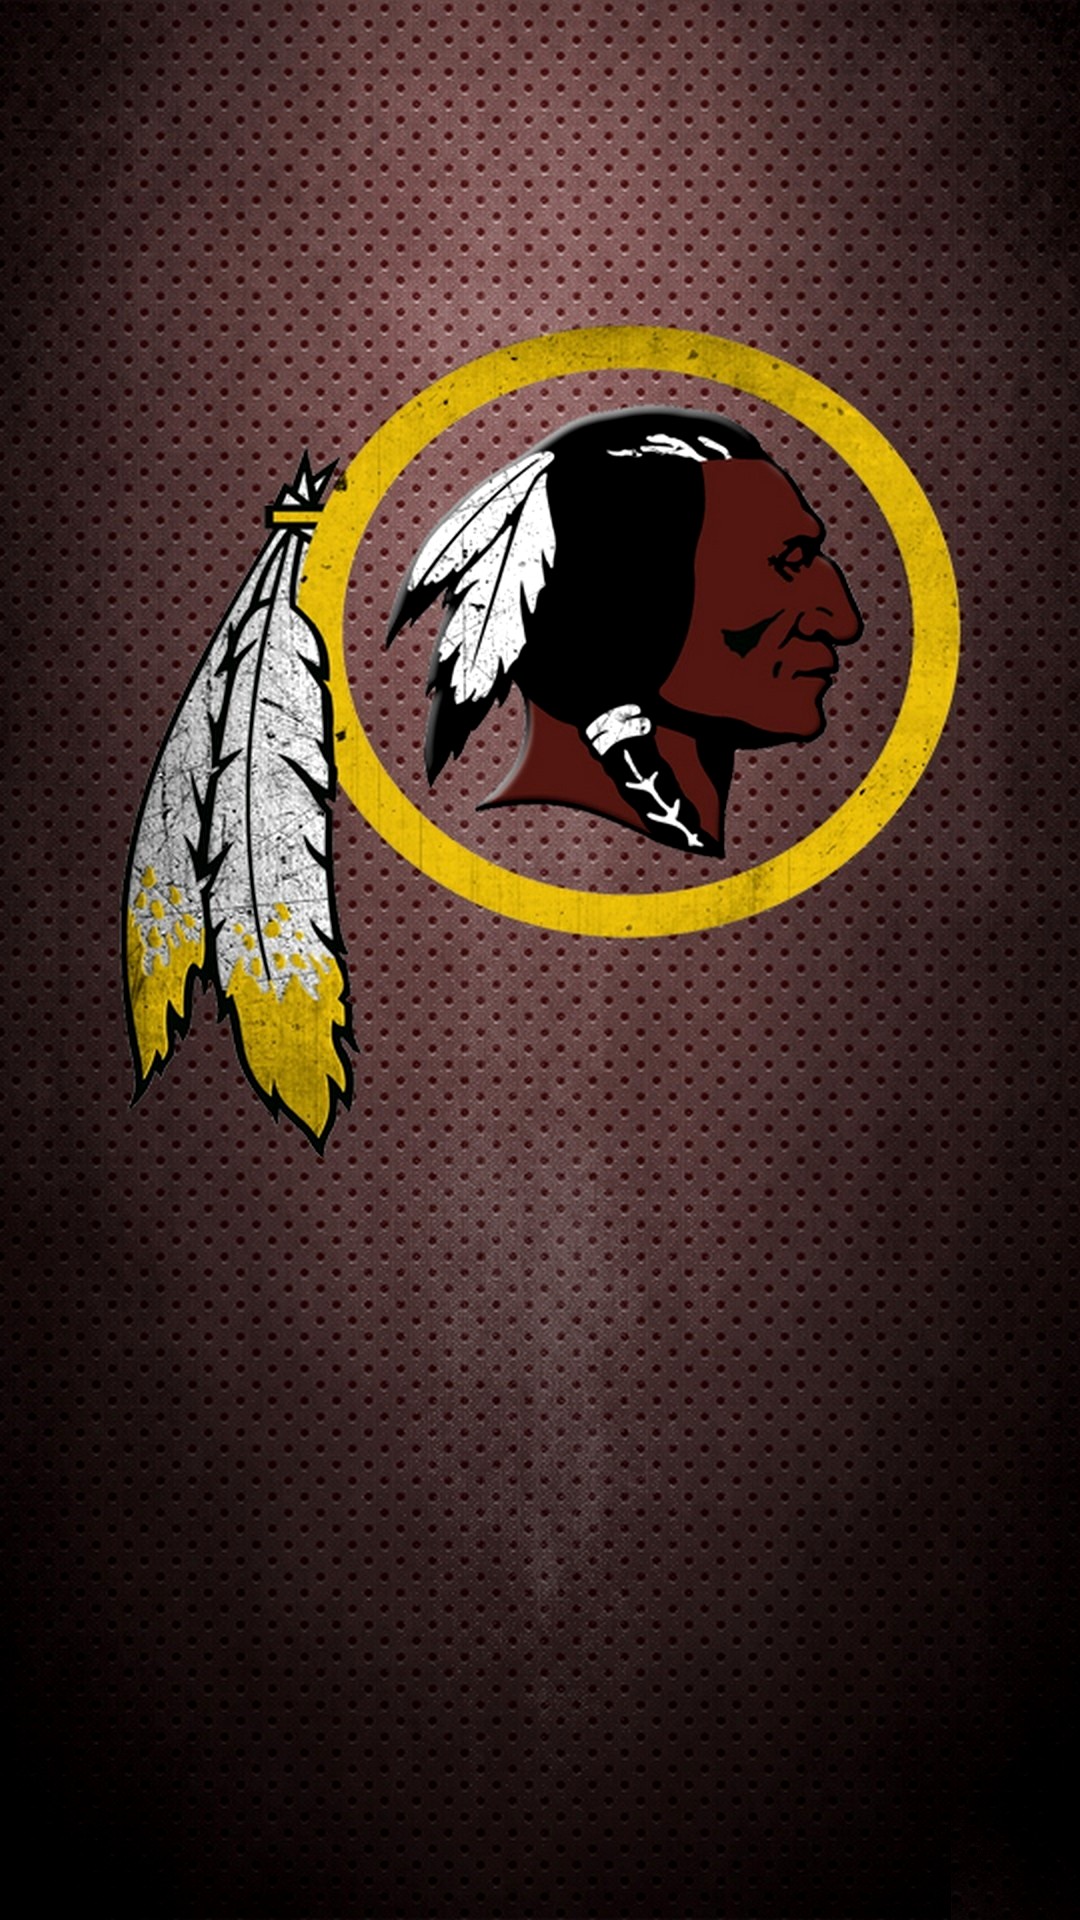 Wallpaper Mobile Washington Redskins with high-resolution 1080x1920 pixel. You can use and set as wallpaper for Notebook Screensavers, Mac Wallpapers, Mobile Home Screen, iPhone or Android Phones Lock Screen